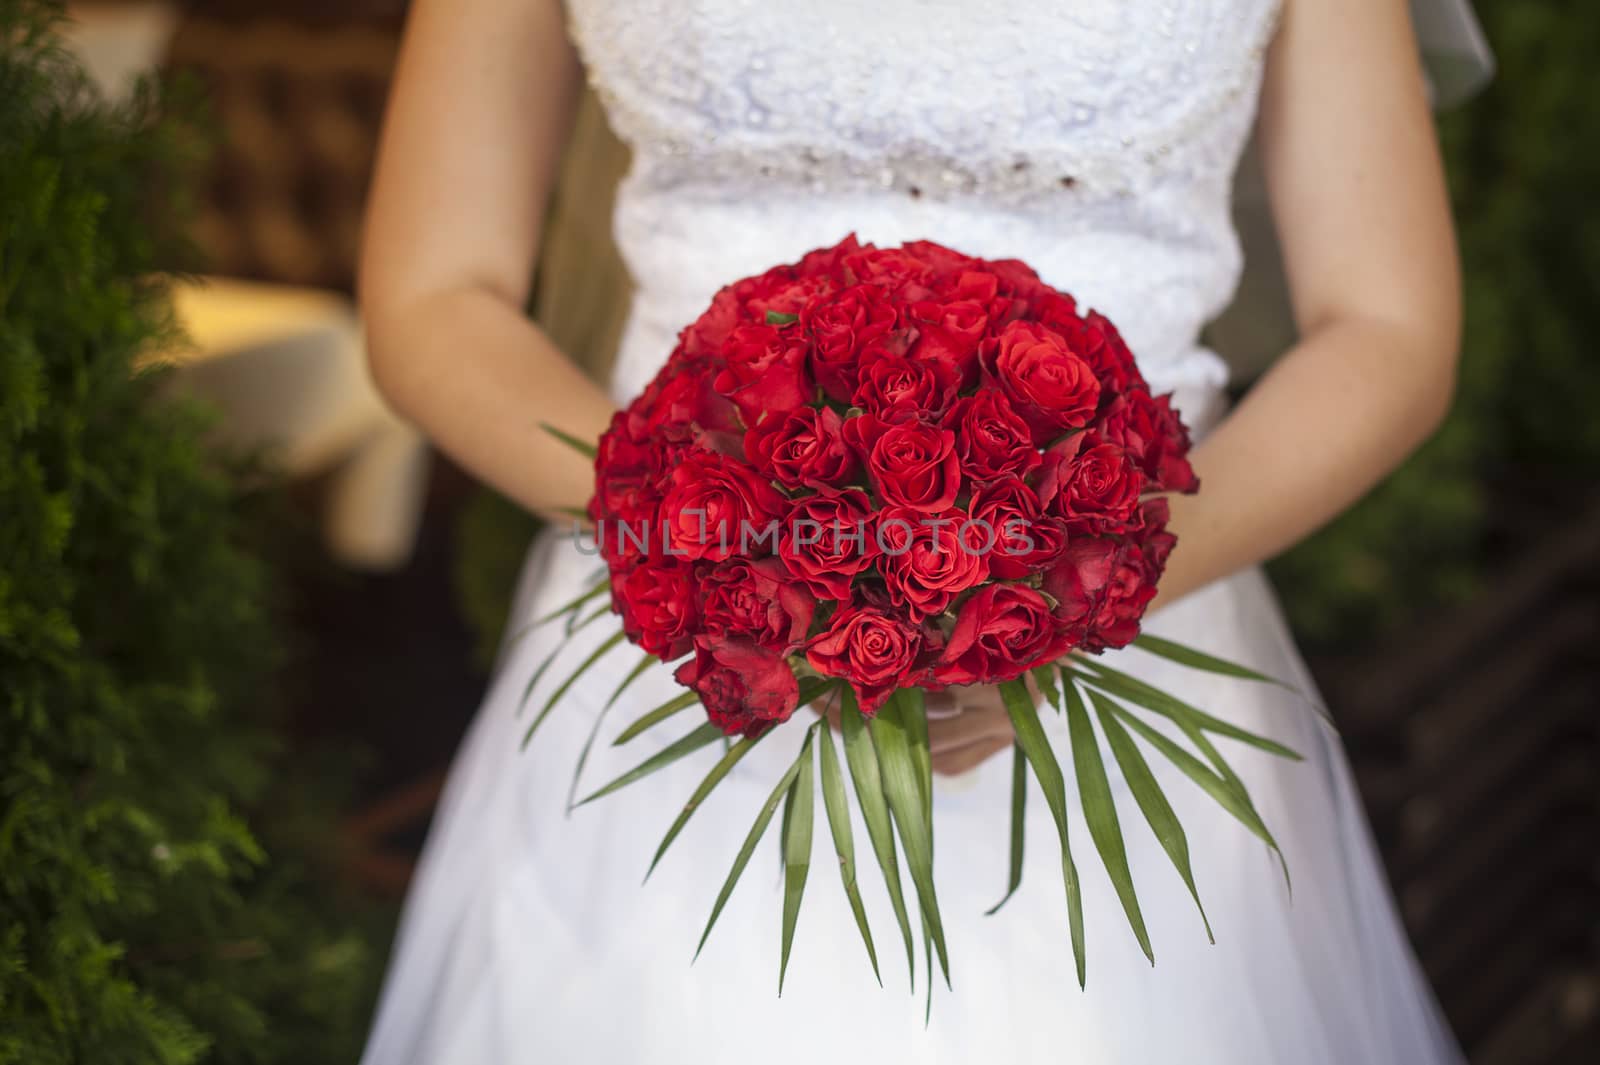 wedding bouquet of red roses and leaves in brides hands by timonko